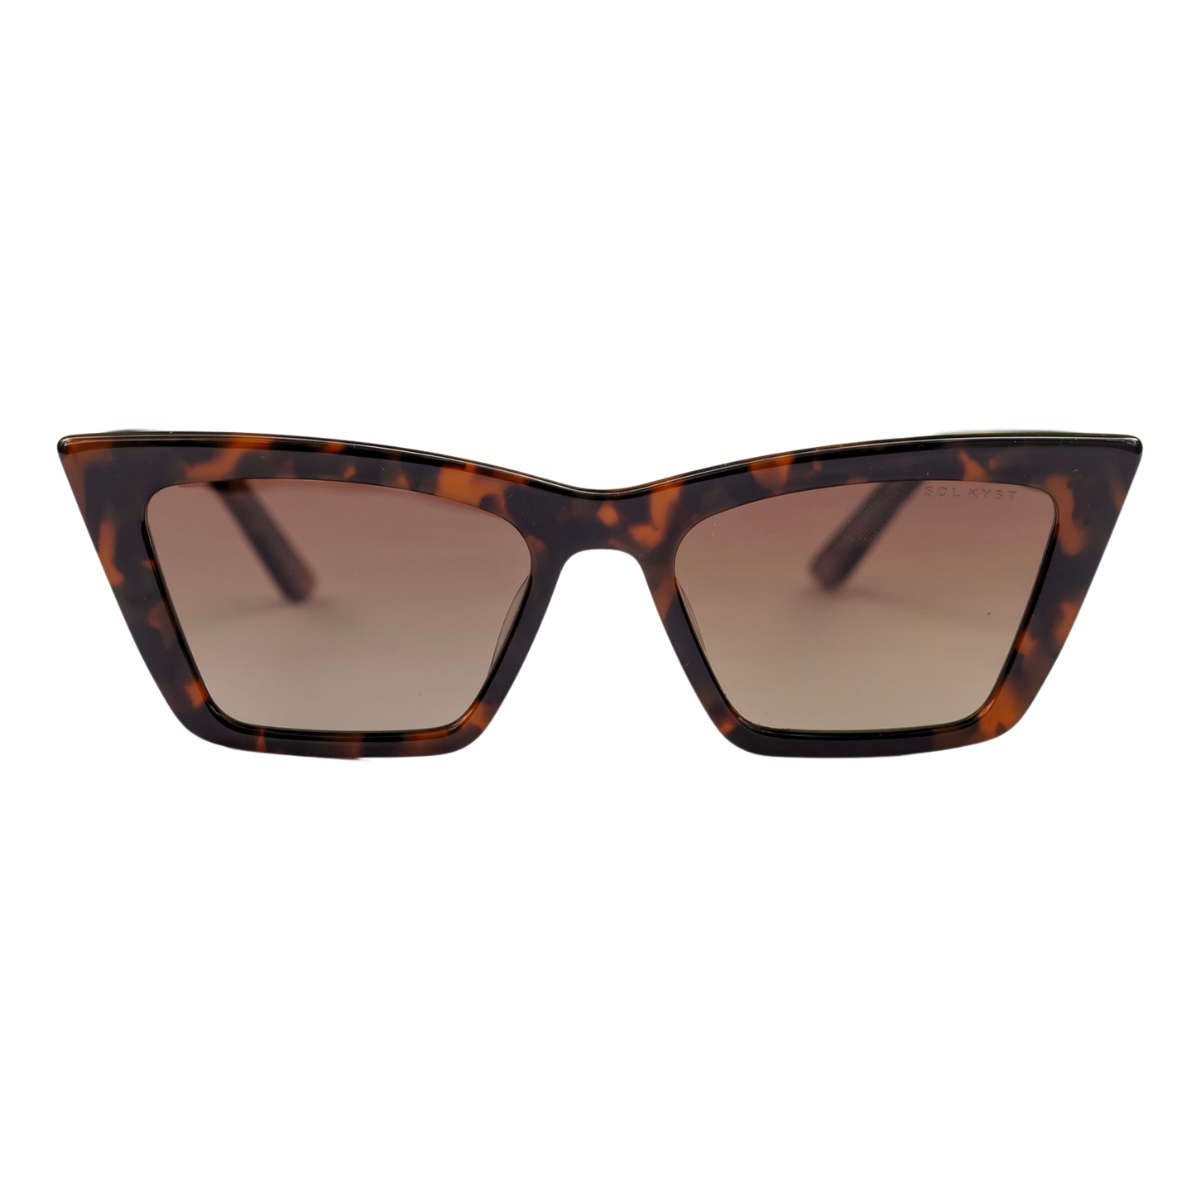 sunglasses, Trapezoid silhouette, trap silhouette, Tort frame, smokey brown lens, wide face petite, midi sunglasses, slightly wider than standard